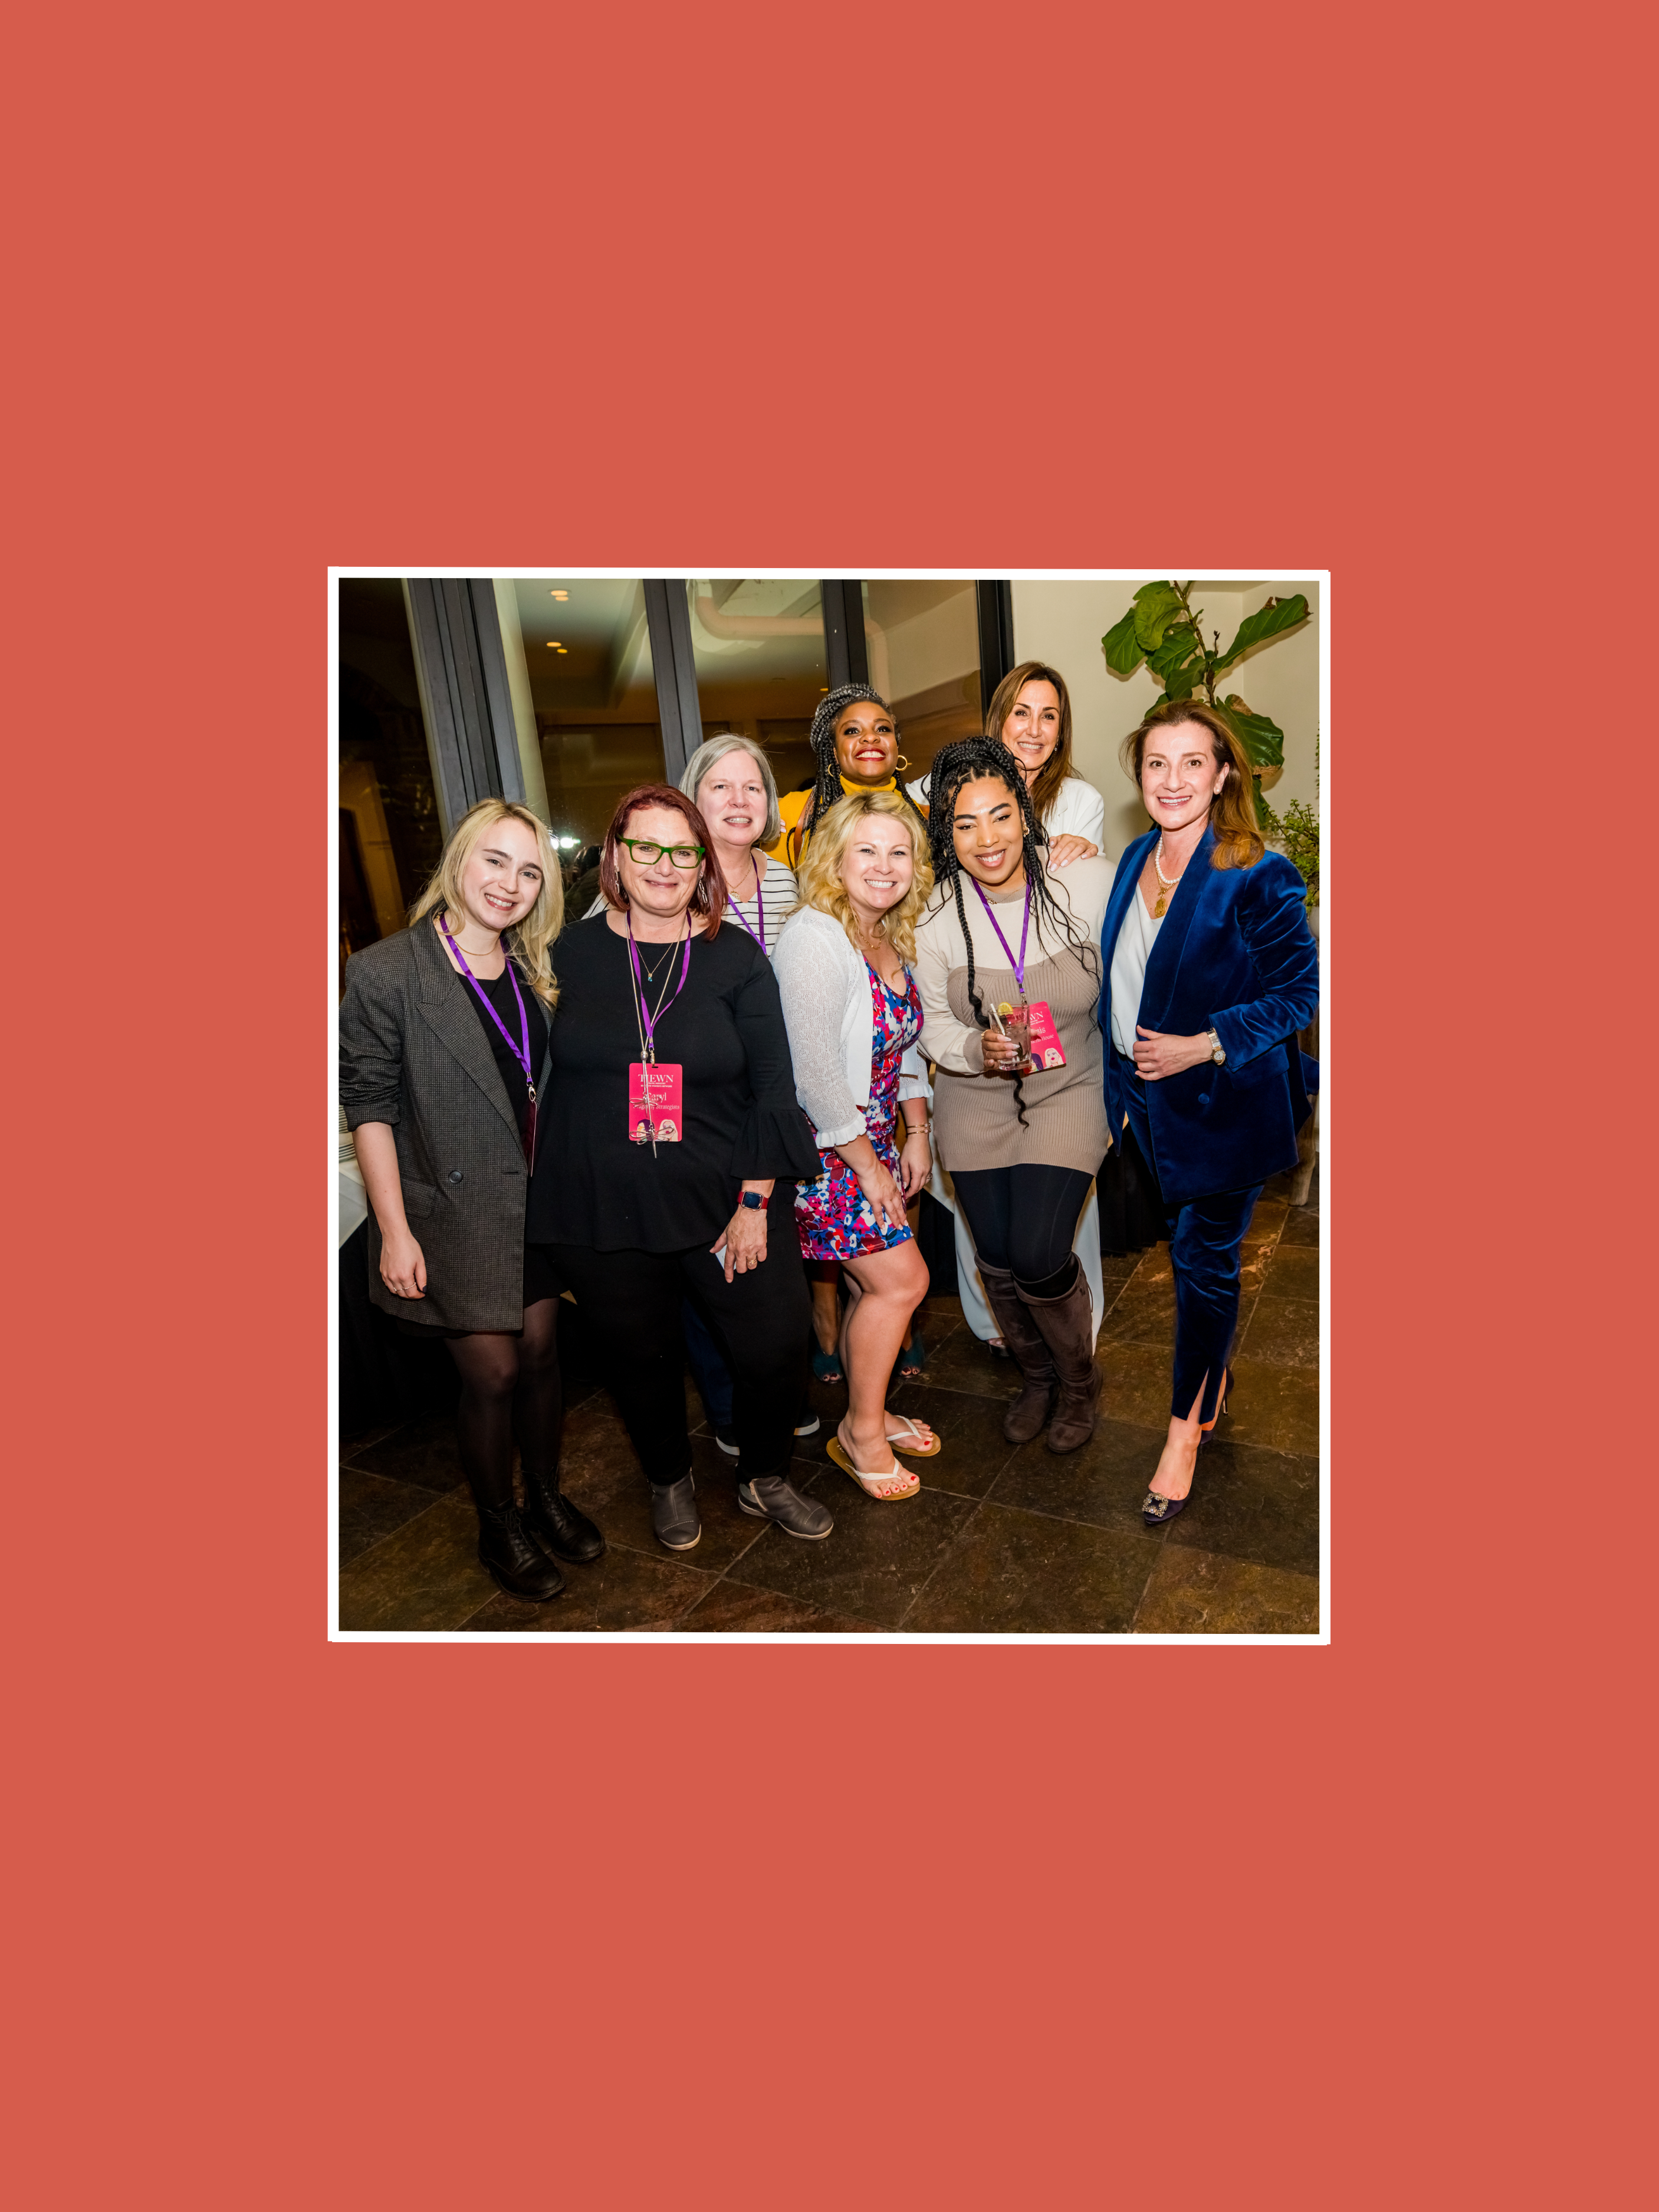 Annual TIEWN Gathering Sets New Paradigm for Building a Supportive Community of Professional Women